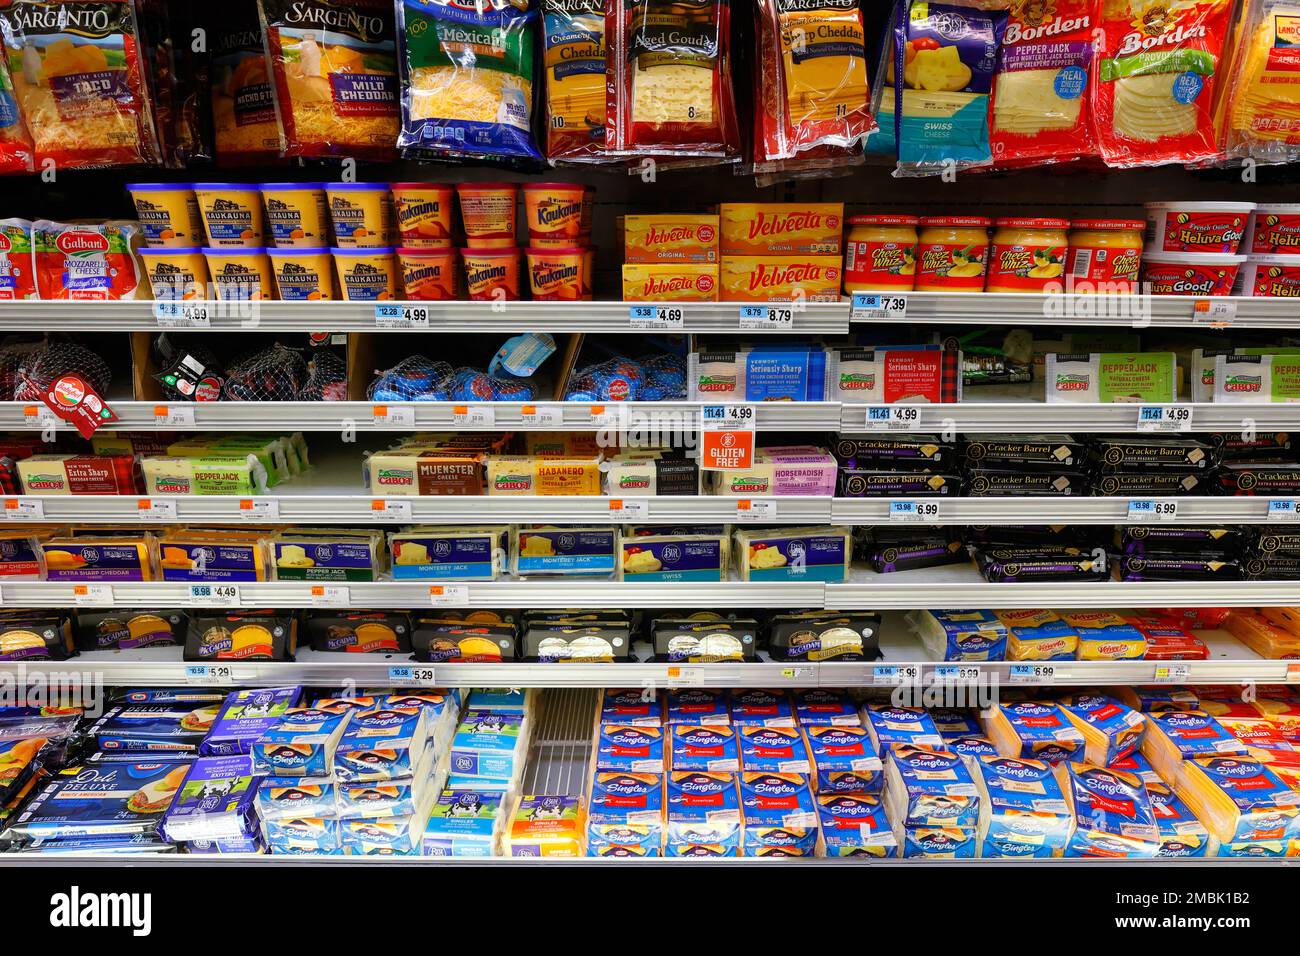 American cheeses, cheddar, and cheese spread in an American supermarket dairy aisle. Stock Photo